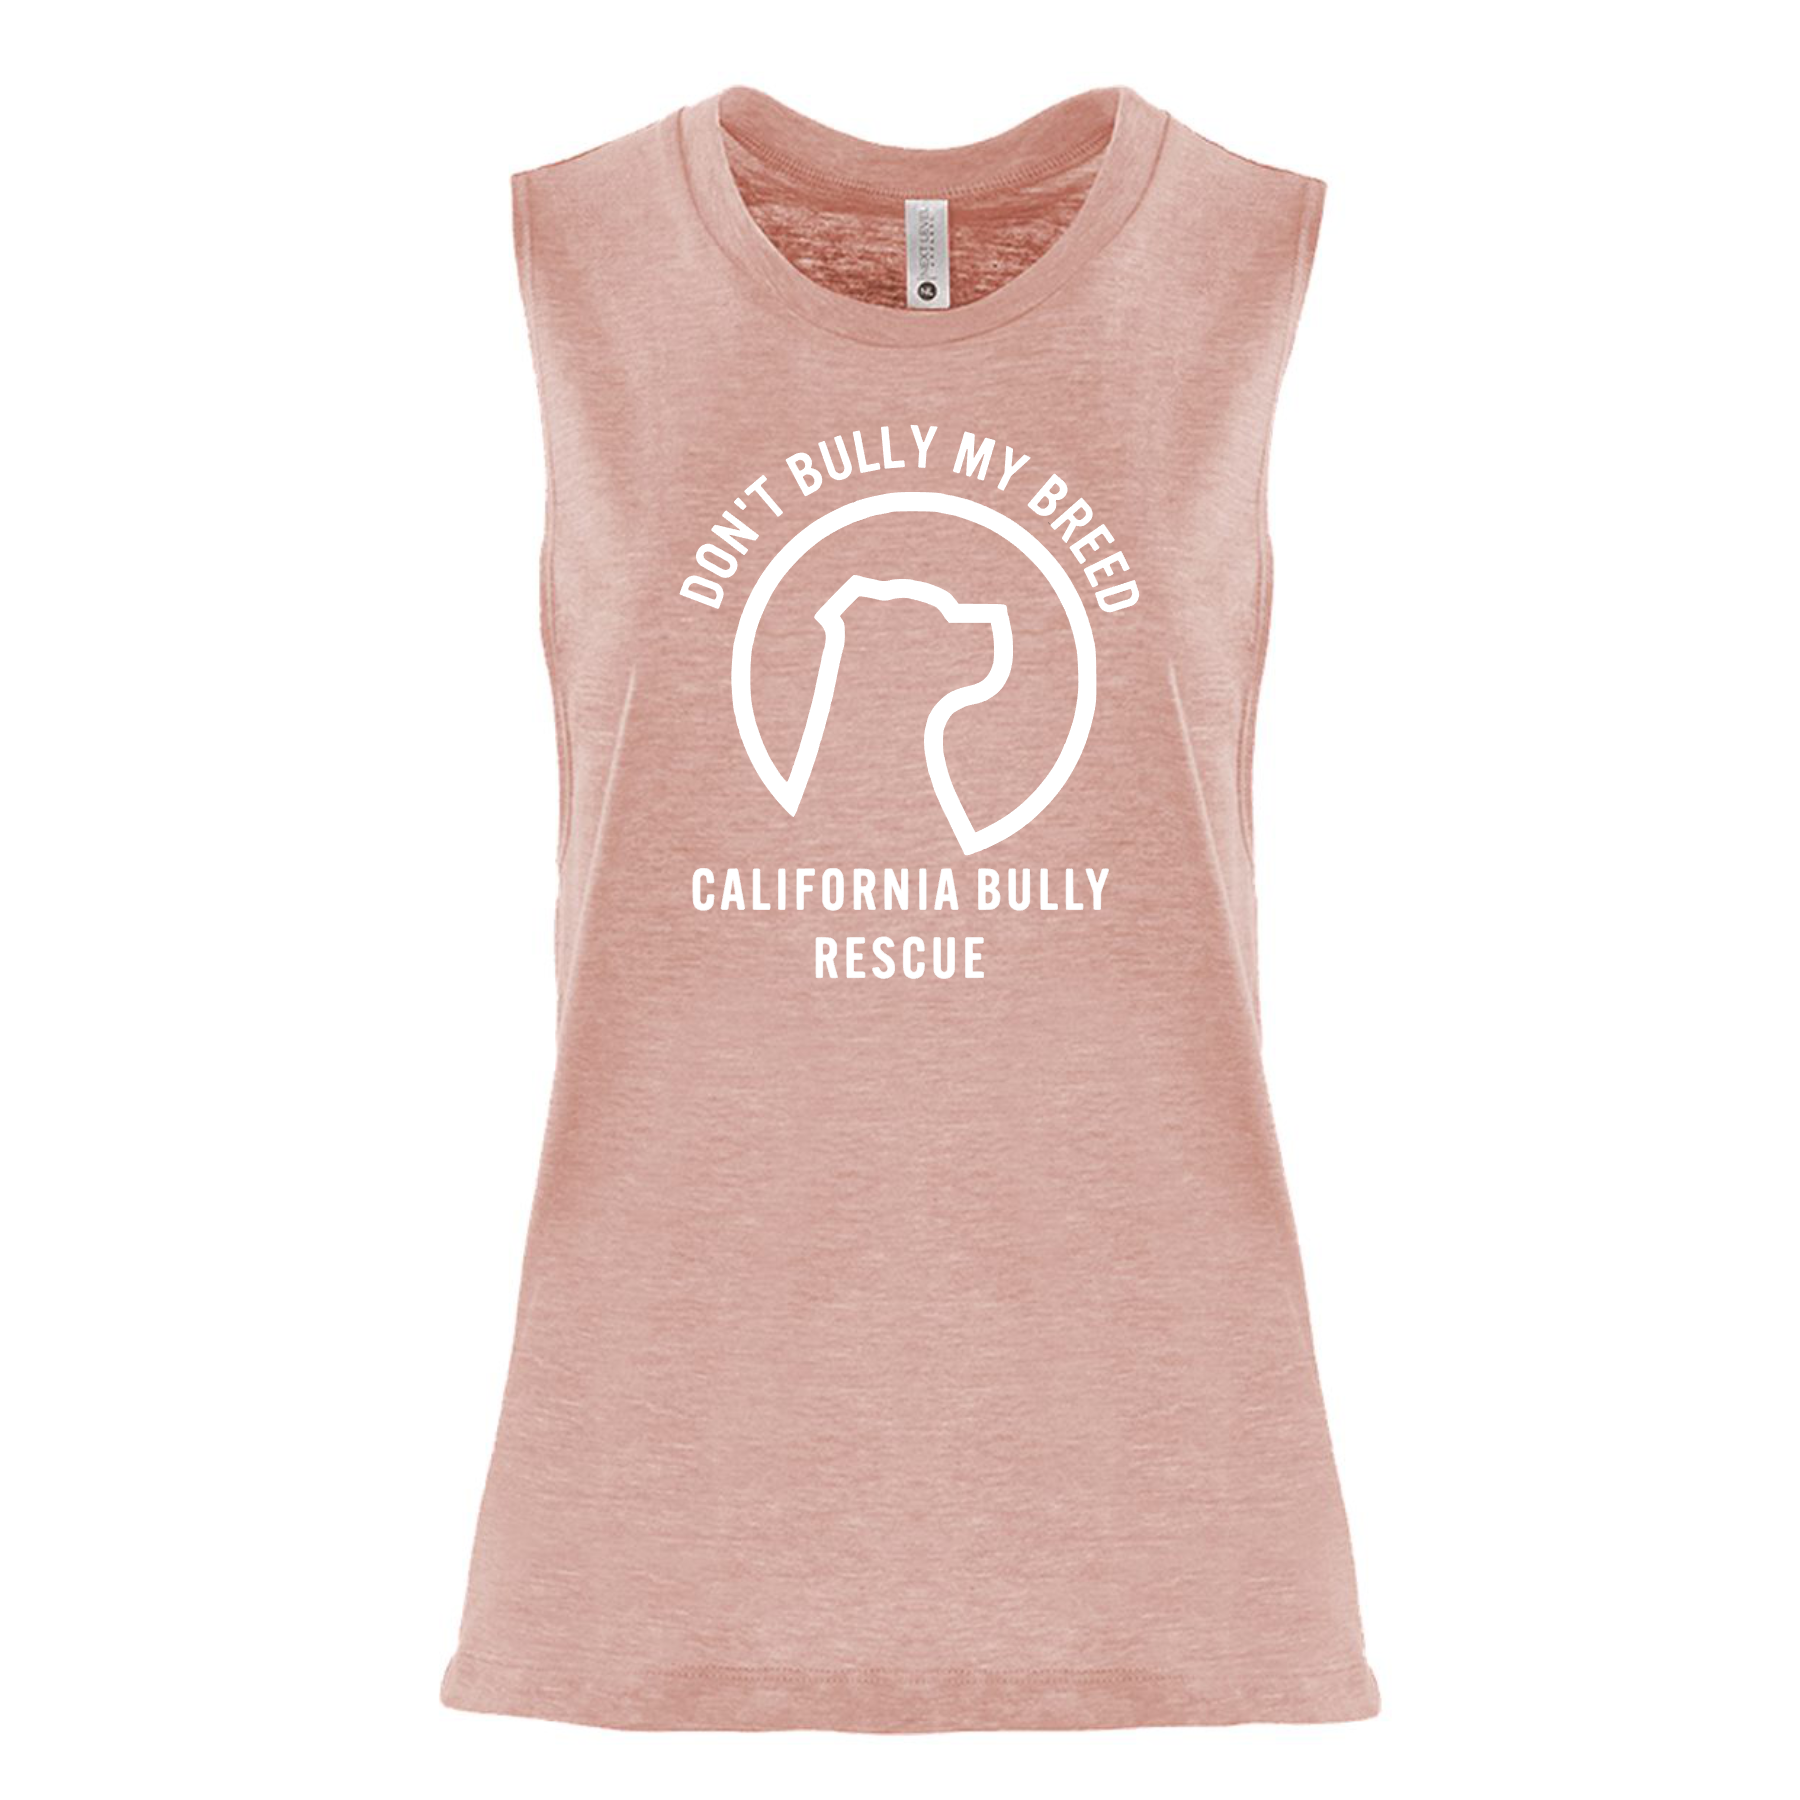 CA Bully Rescue Muscle Tank (Available in several colors)